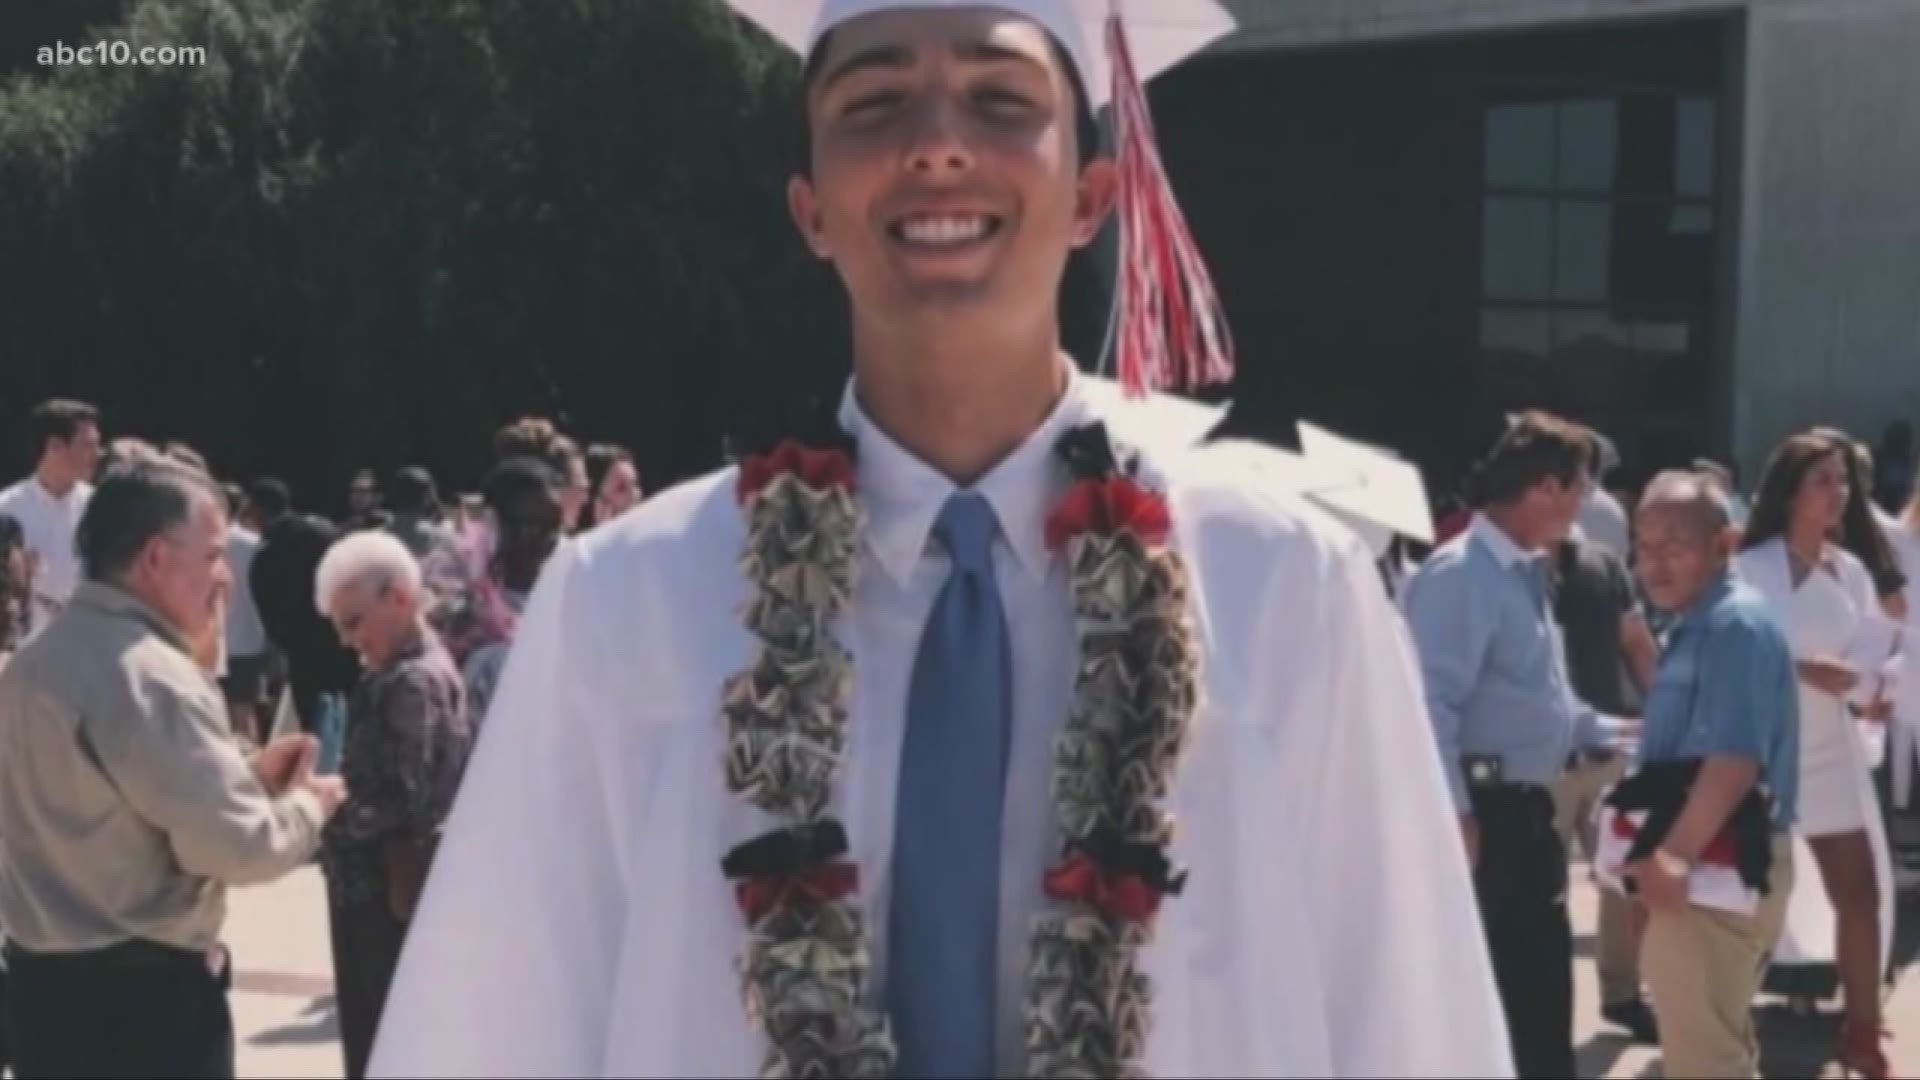 Dylan Hernandez was taken to a hospital and died Sunday surrounded by his family, University President Adela de la Torre said in a statement to students and parents.